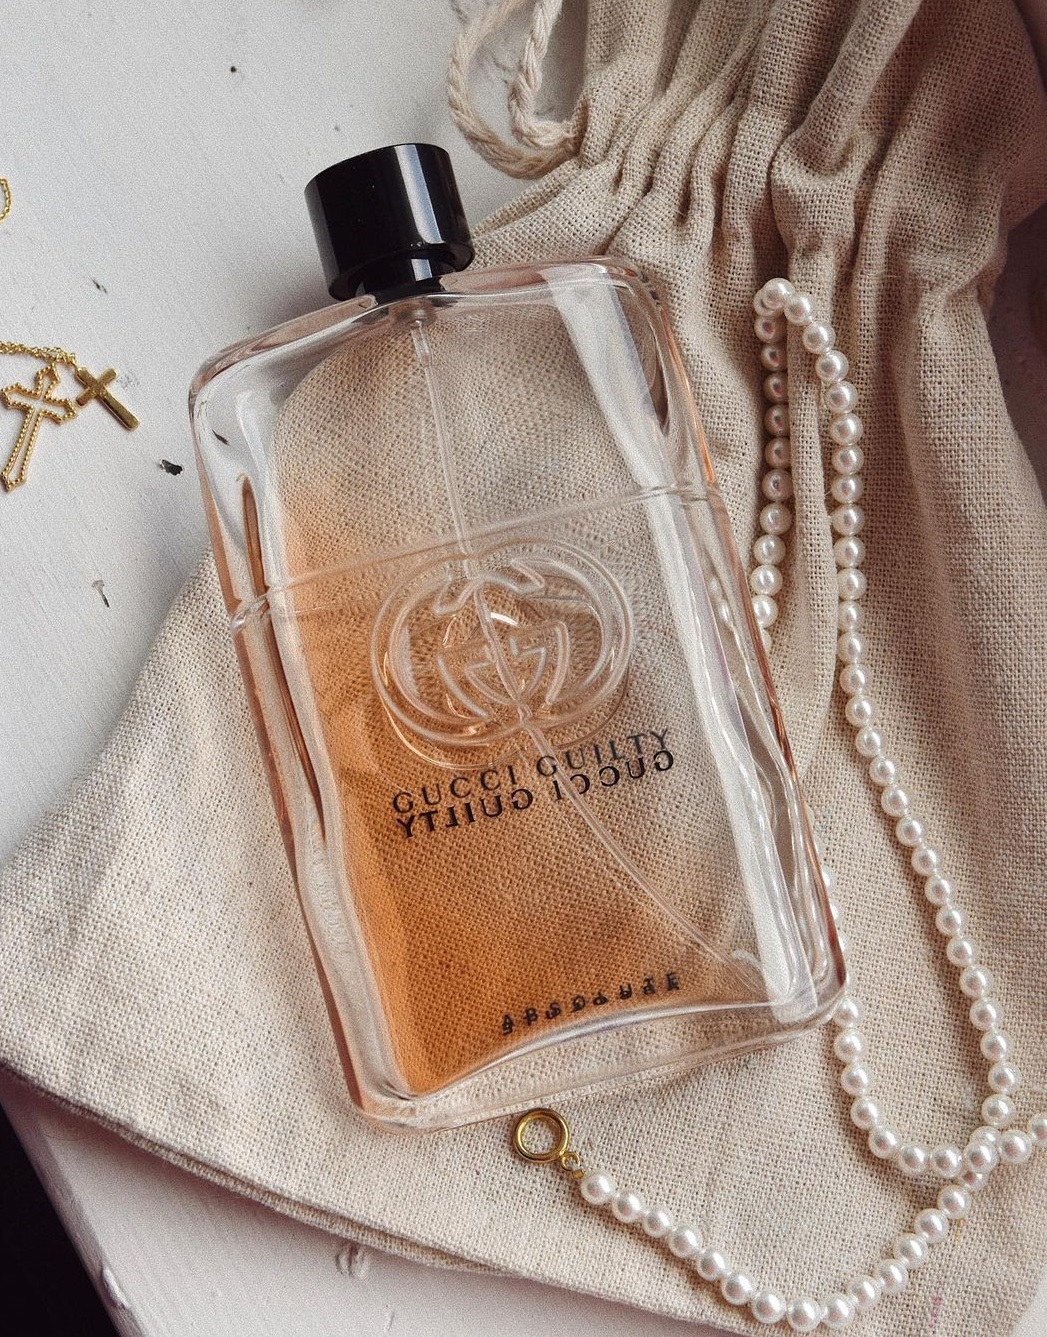 Gucci perfume being a must-have product to own